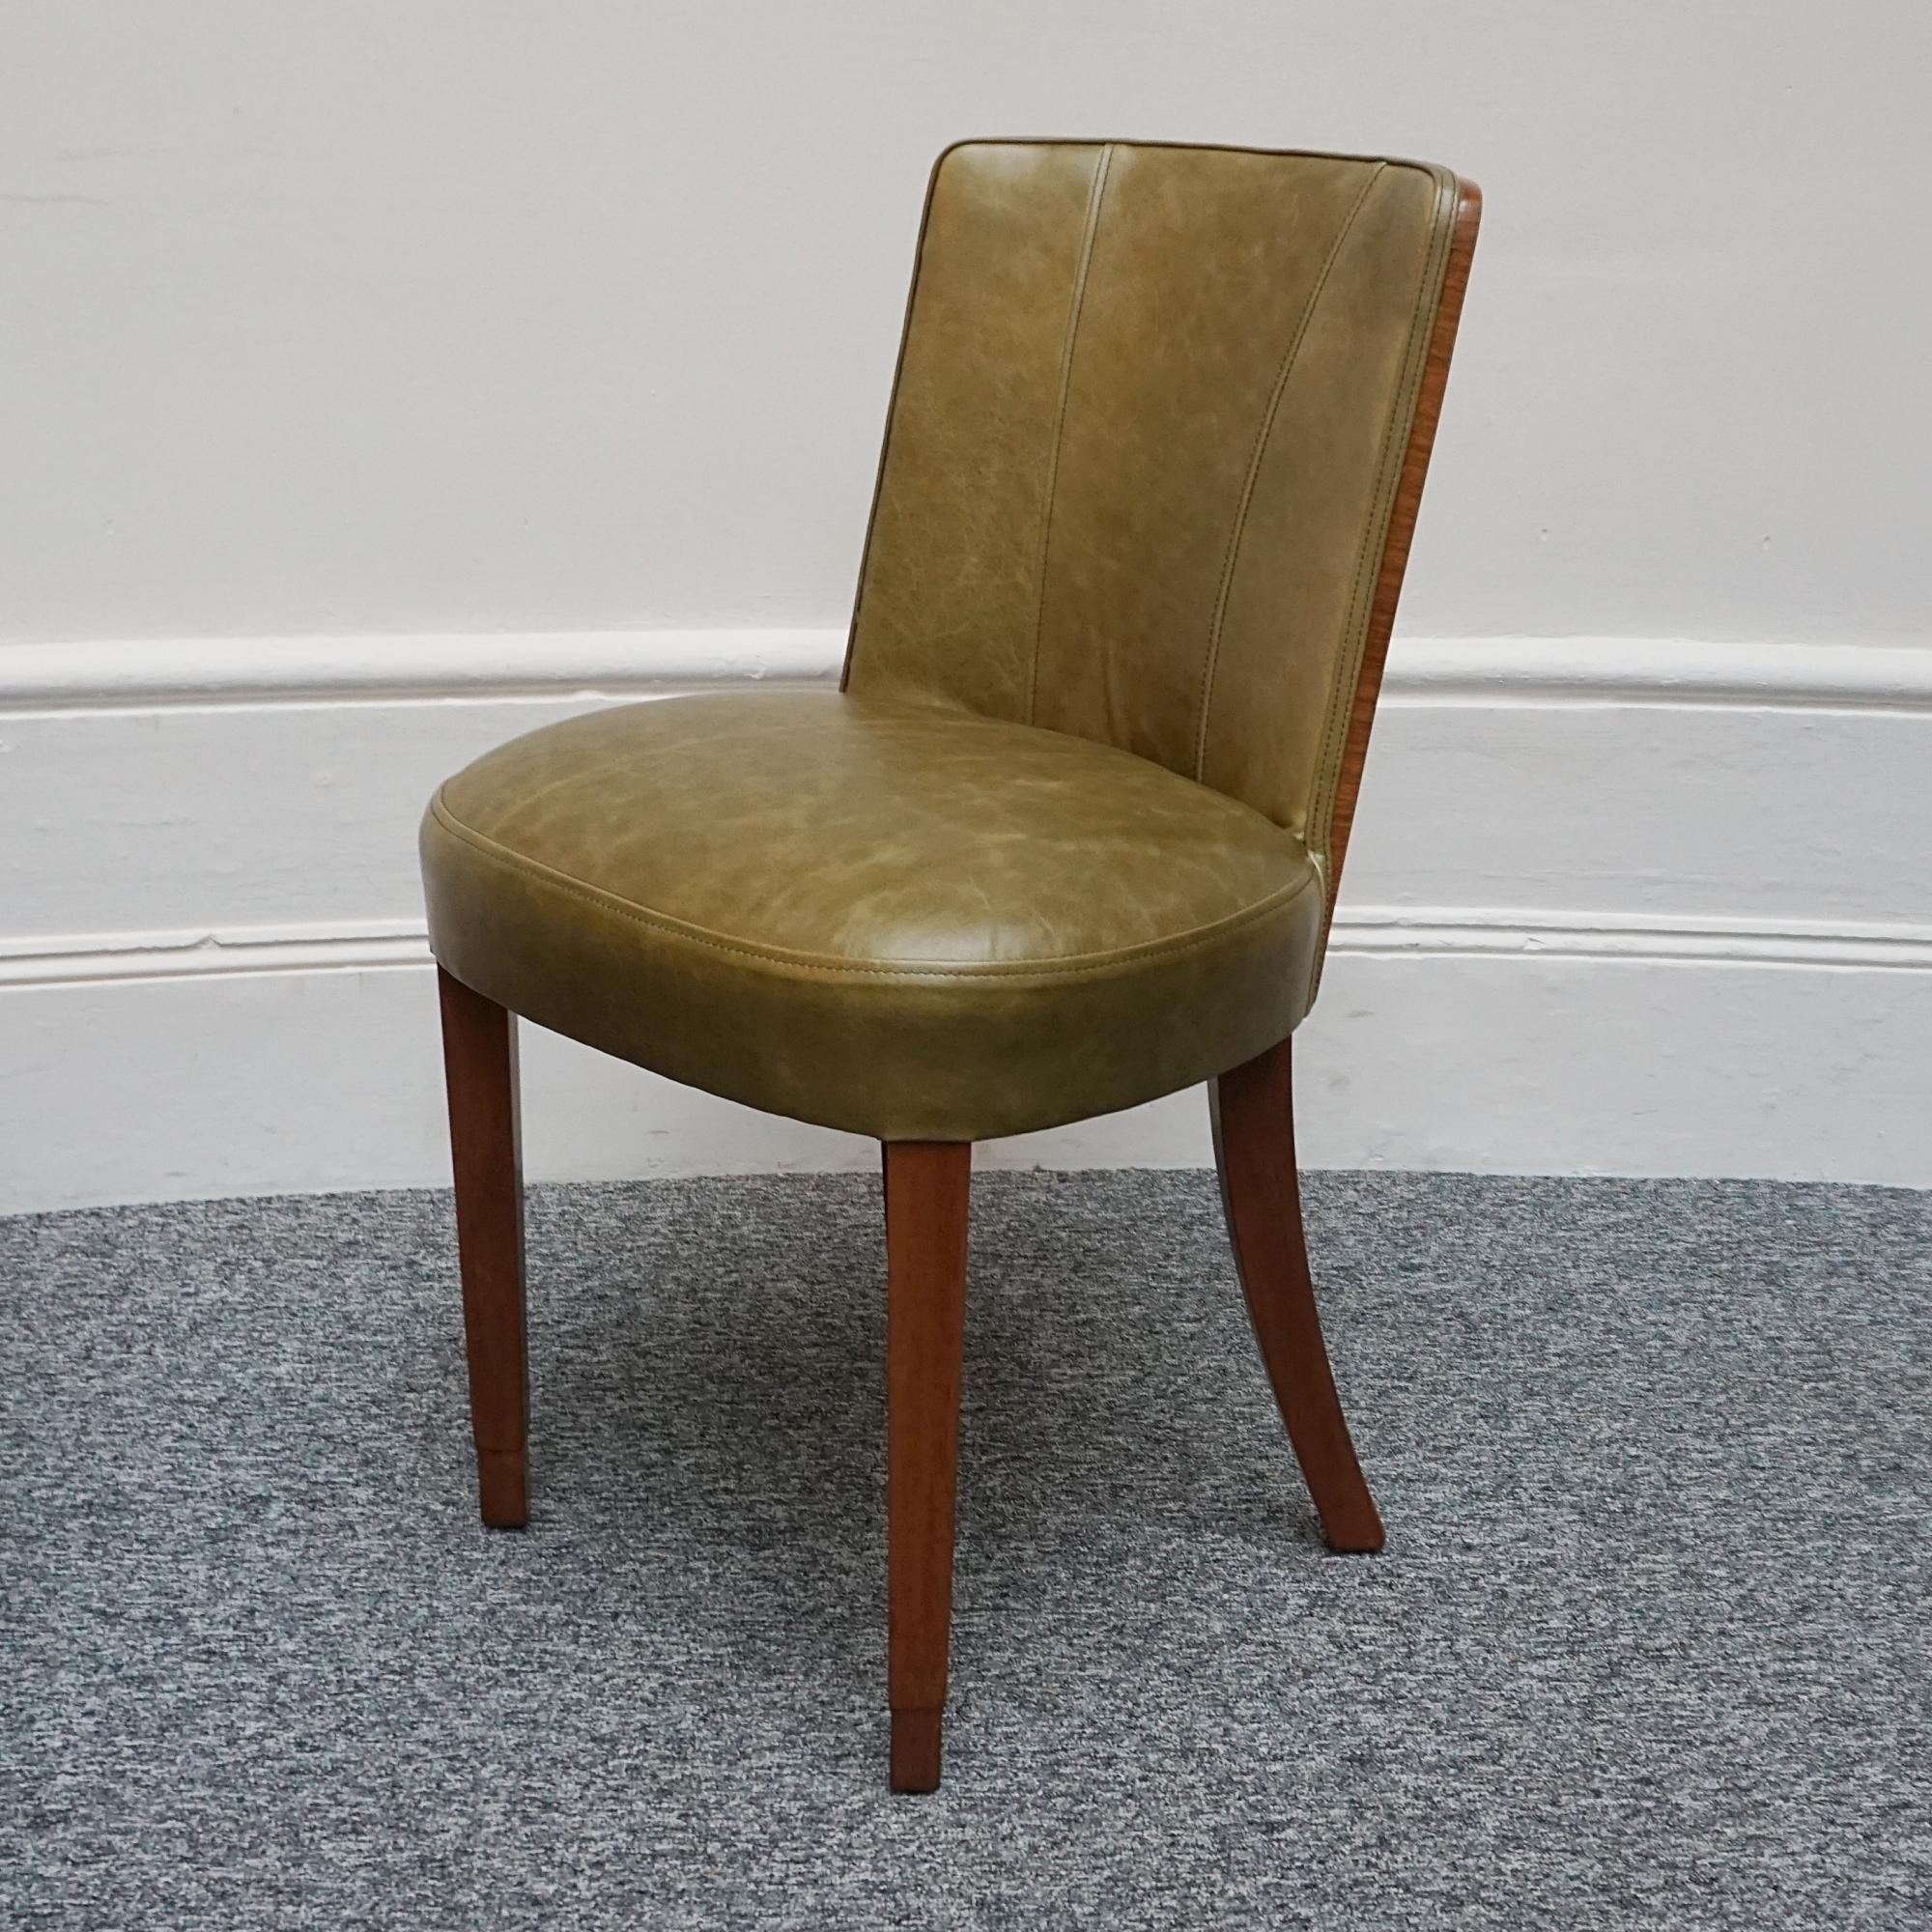 An Art Deco Desk Chair with Green Leather Upholstery and Figured and Sold Walnut 1